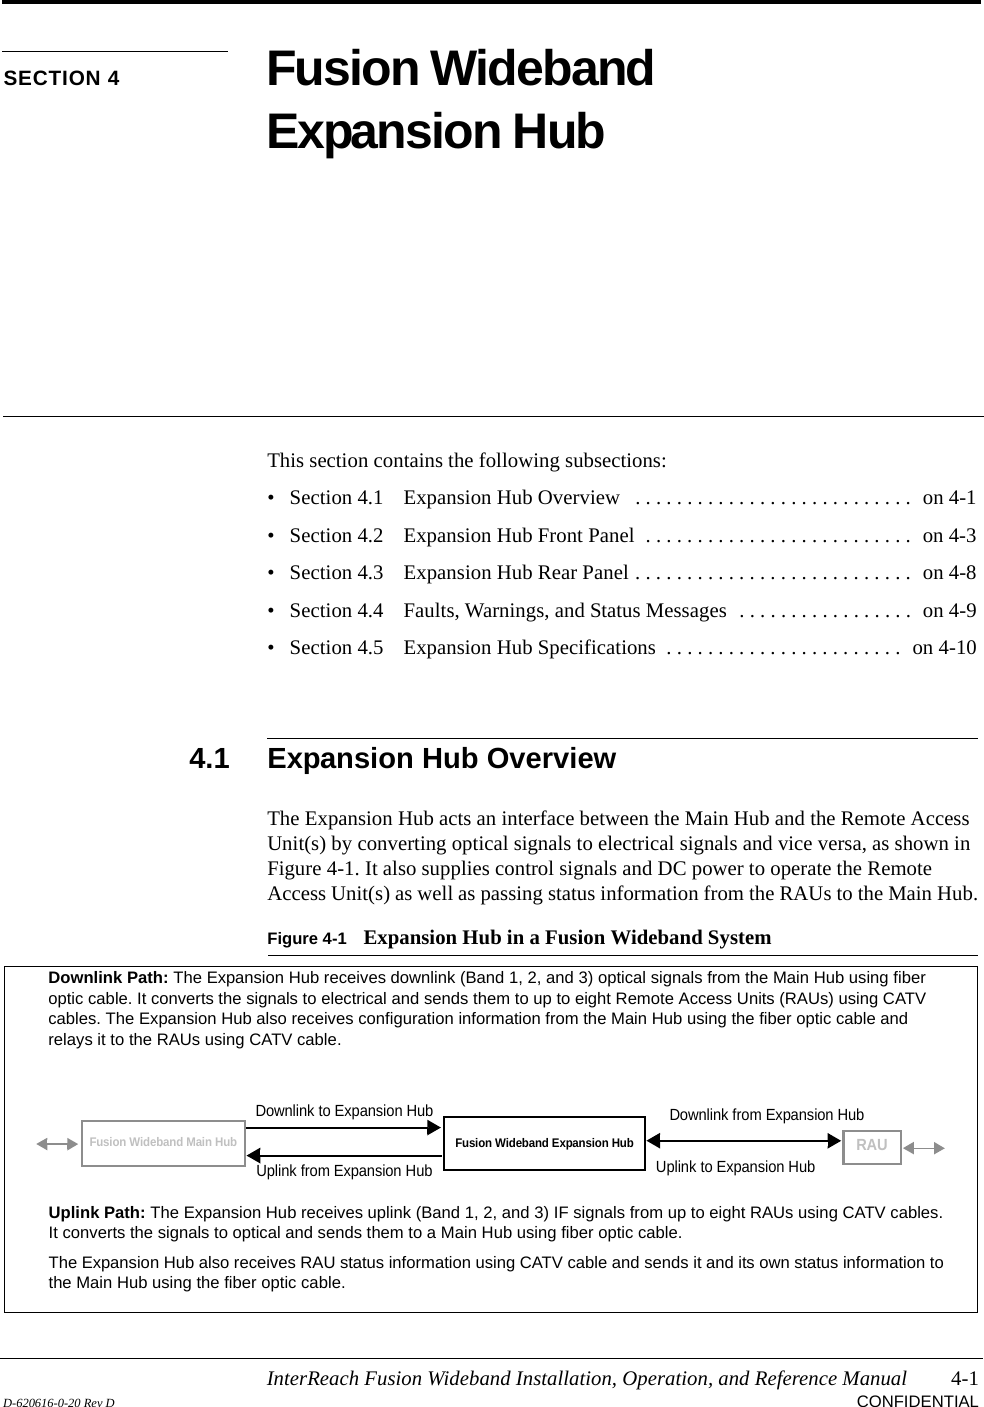 InterReach Fusion Wideband Installation, Operation, and Reference Manual 4-1D-620616-0-20 Rev D CONFIDENTIALSECTION 4 Fusion Wideband Expansion HubThis section contains the following subsections:• Section 4.1   Expansion Hub Overview   . . . . . . . . . . . . . . . . . . . . . . . . . . .  on 4-1• Section 4.2   Expansion Hub Front Panel  . . . . . . . . . . . . . . . . . . . . . . . . . .  on 4-3• Section 4.3   Expansion Hub Rear Panel . . . . . . . . . . . . . . . . . . . . . . . . . . .  on 4-8• Section 4.4   Faults, Warnings, and Status Messages  . . . . . . . . . . . . . . . . .  on 4-9• Section 4.5   Expansion Hub Specifications  . . . . . . . . . . . . . . . . . . . . . . .  on 4-104.1 Expansion Hub OverviewThe Expansion Hub acts an interface between the Main Hub and the Remote Access Unit(s) by converting optical signals to electrical signals and vice versa, as shown in Figure 4-1. It also supplies control signals and DC power to operate the Remote Access Unit(s) as well as passing status information from the RAUs to the Main Hub.Figure 4-1 Expansion Hub in a Fusion Wideband SystemFusion Wideband Expansion HubFusion Wideband Main HubRAUDownlink Path: The Expansion Hub receives downlink (Band 1, 2, and 3) optical signals from the Main Hub using fiber optic cable. It converts the signals to electrical and sends them to up to eight Remote Access Units (RAUs) using CATV cables. The Expansion Hub also receives configuration information from the Main Hub using the fiber optic cable and relays it to the RAUs using CATV cable.Uplink Path: The Expansion Hub receives uplink (Band 1, 2, and 3) IF signals from up to eight RAUs using CATV cables. It converts the signals to optical and sends them to a Main Hub using fiber optic cable.The Expansion Hub also receives RAU status information using CATV cable and sends it and its own status information to the Main Hub using the fiber optic cable.Downlink to Expansion HubUplink from Expansion HubDownlink from Expansion HubUplink to Expansion Hub